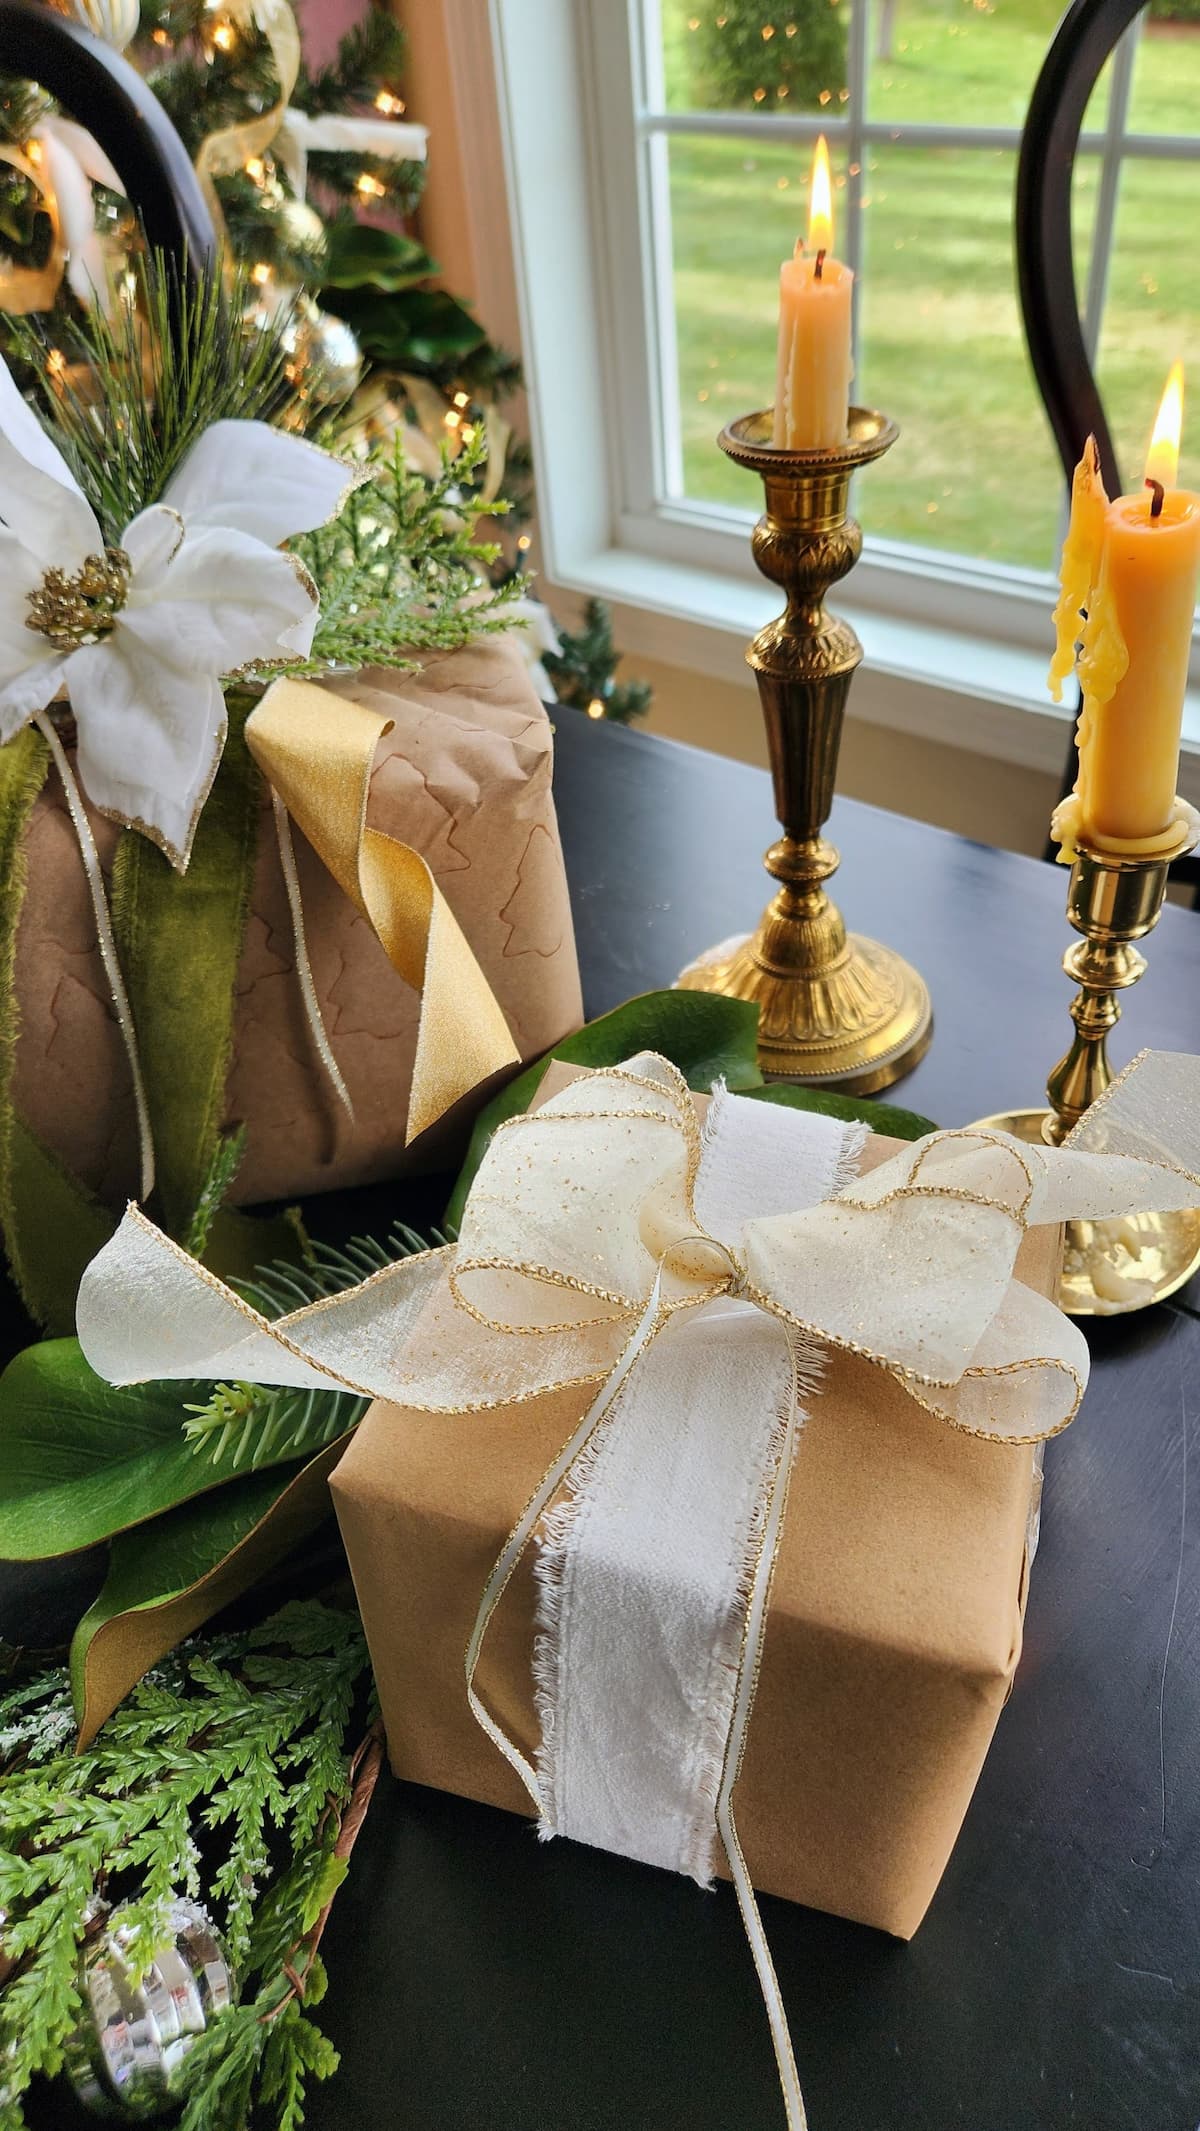 Creative Brown Paper Christmas Gift Wrapping Ideas for a Festive Touch